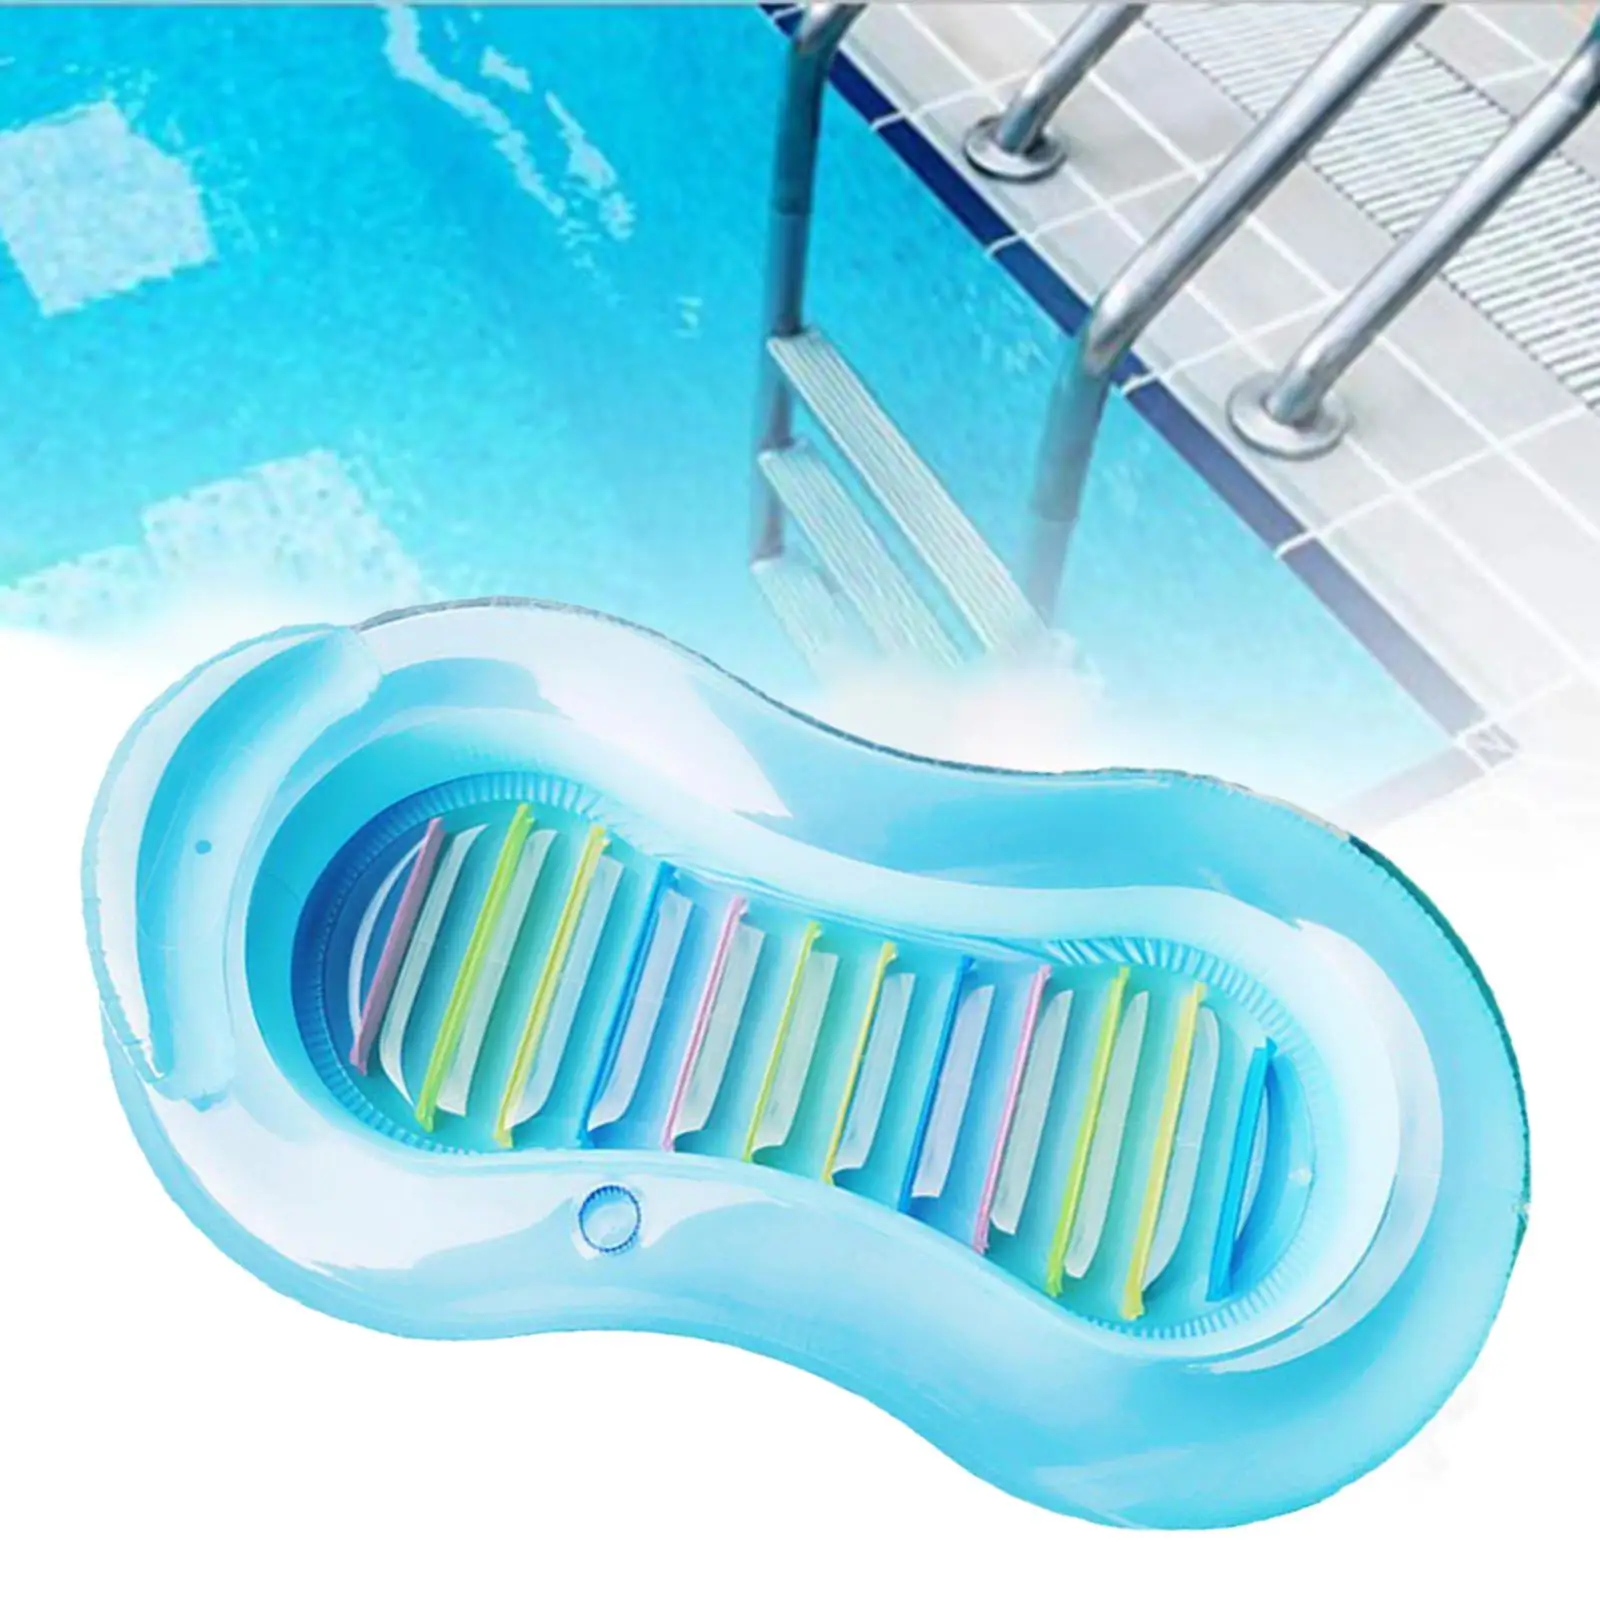 PVC Inflatable Hammock Pool Floats Lounge Water Mattress Mat Floating Rafts Pool Floats for Outdoor